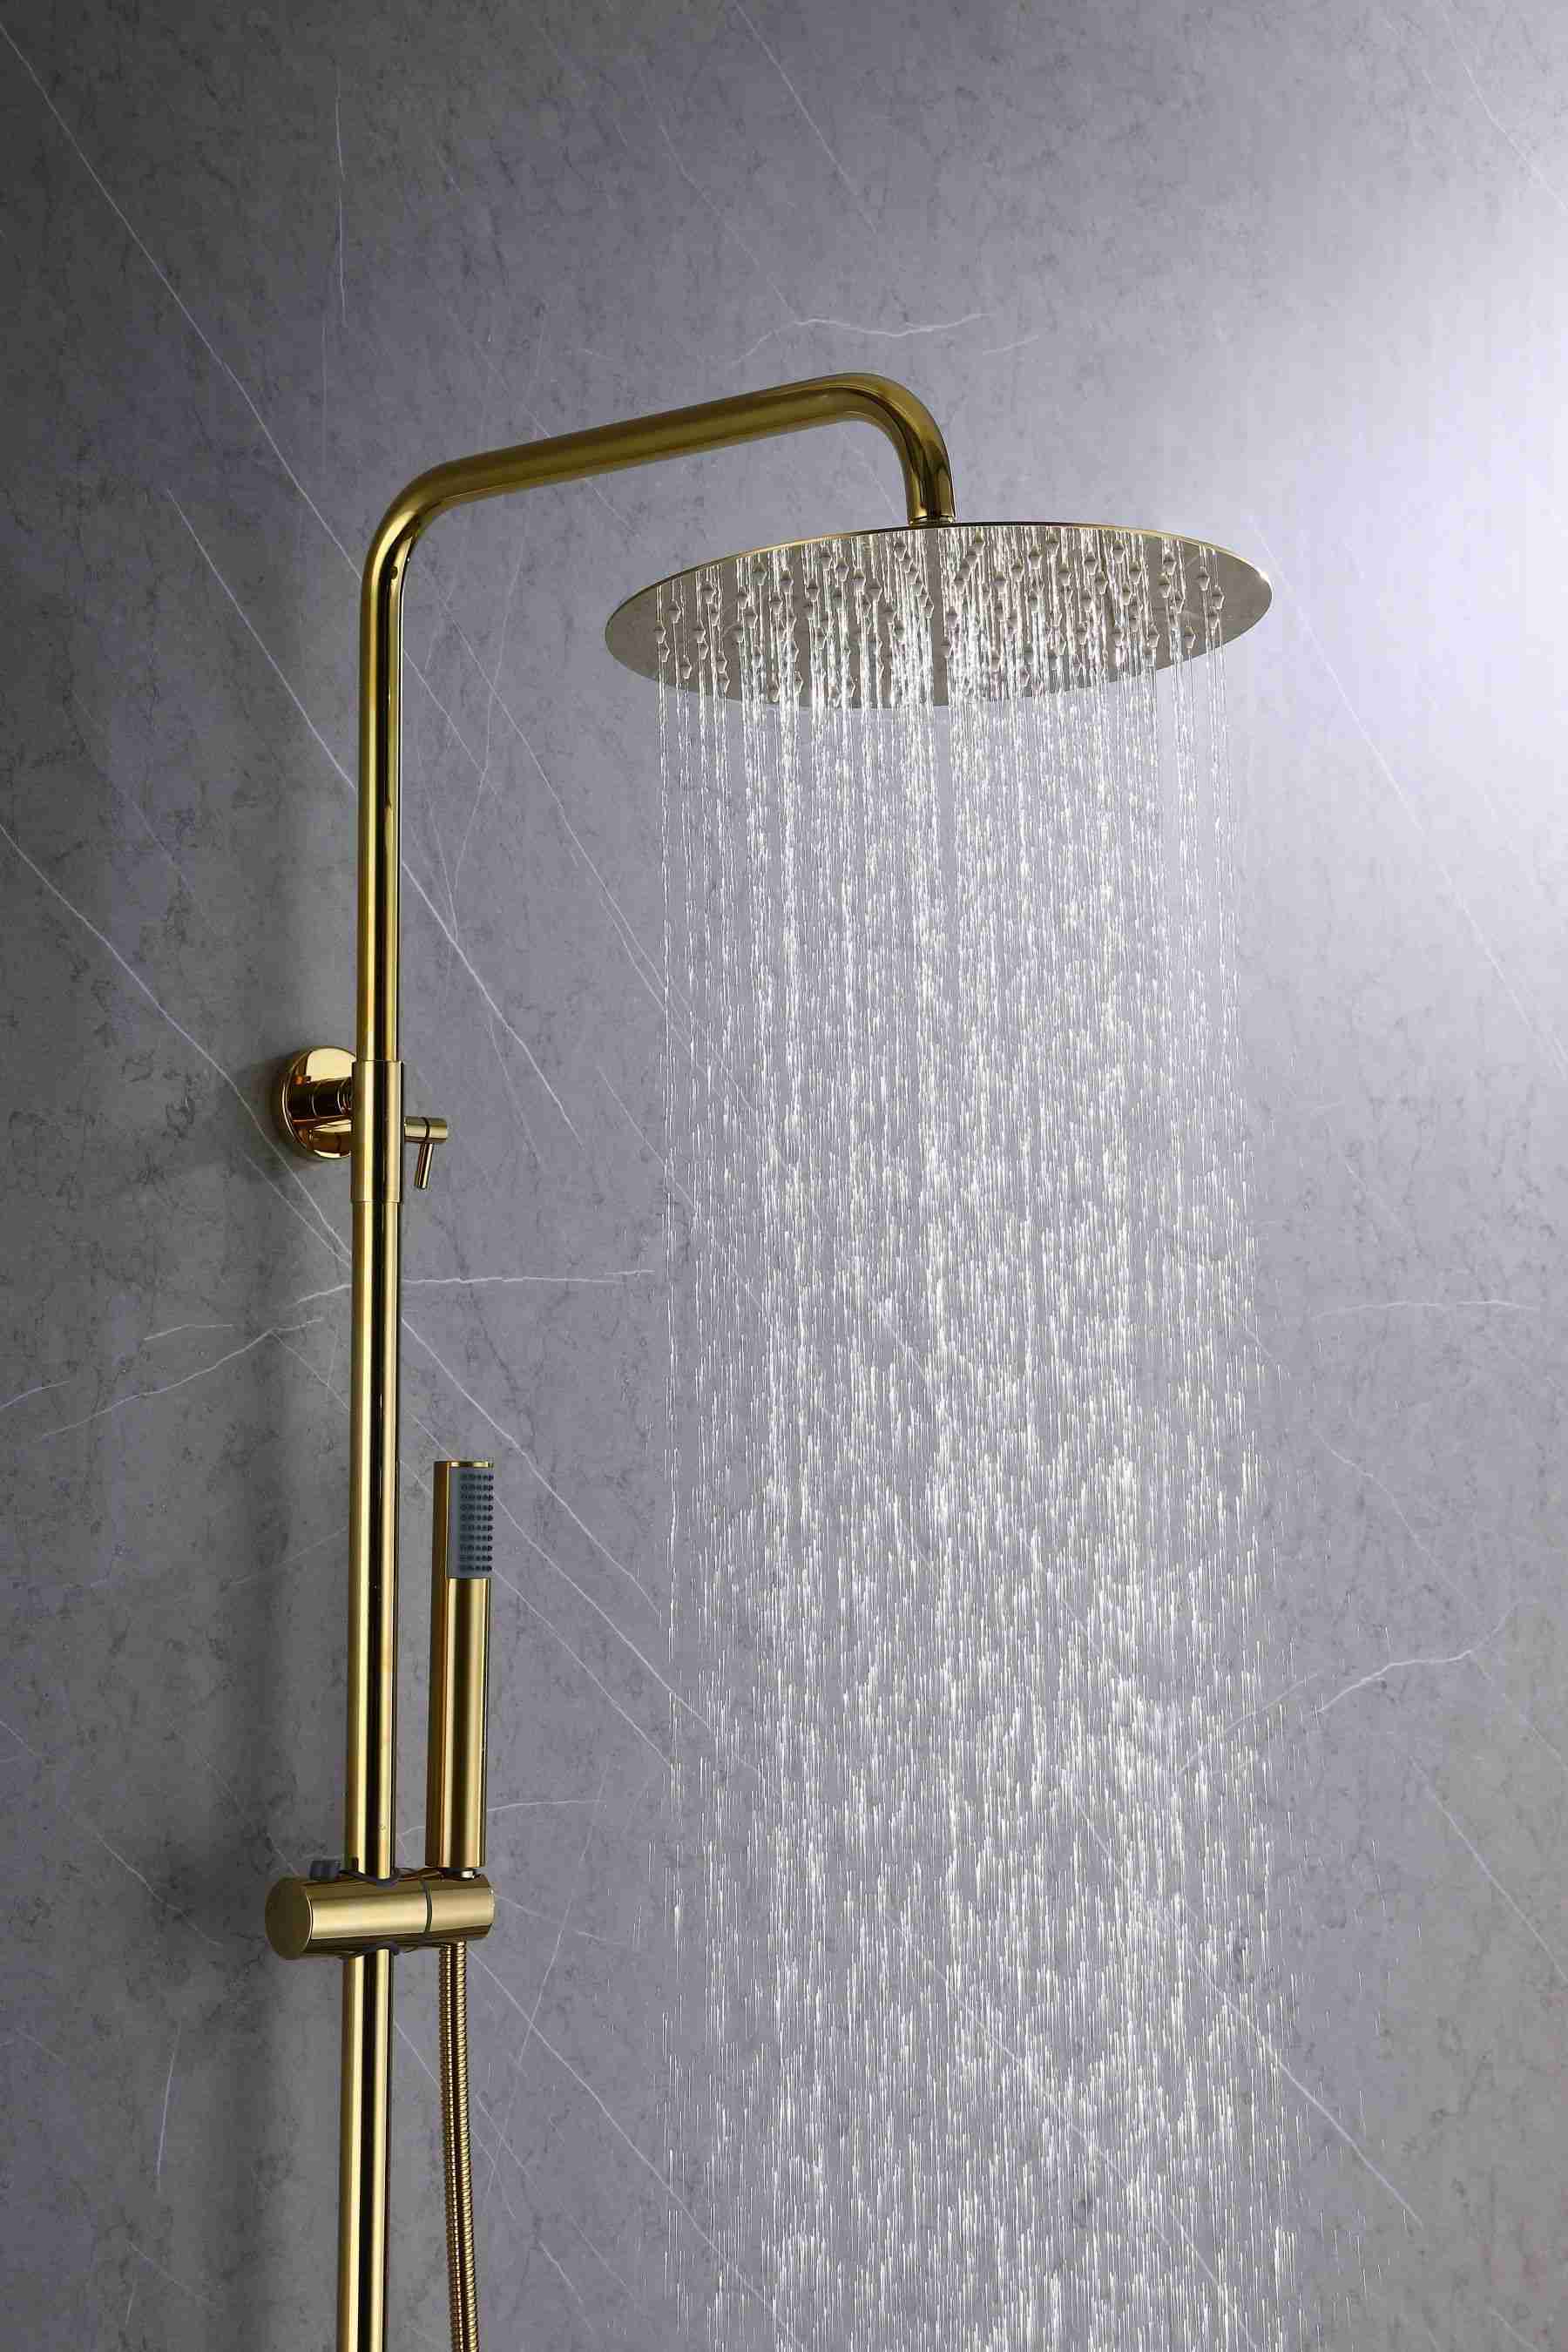 Deluxe Gold Shower Bath Fitter